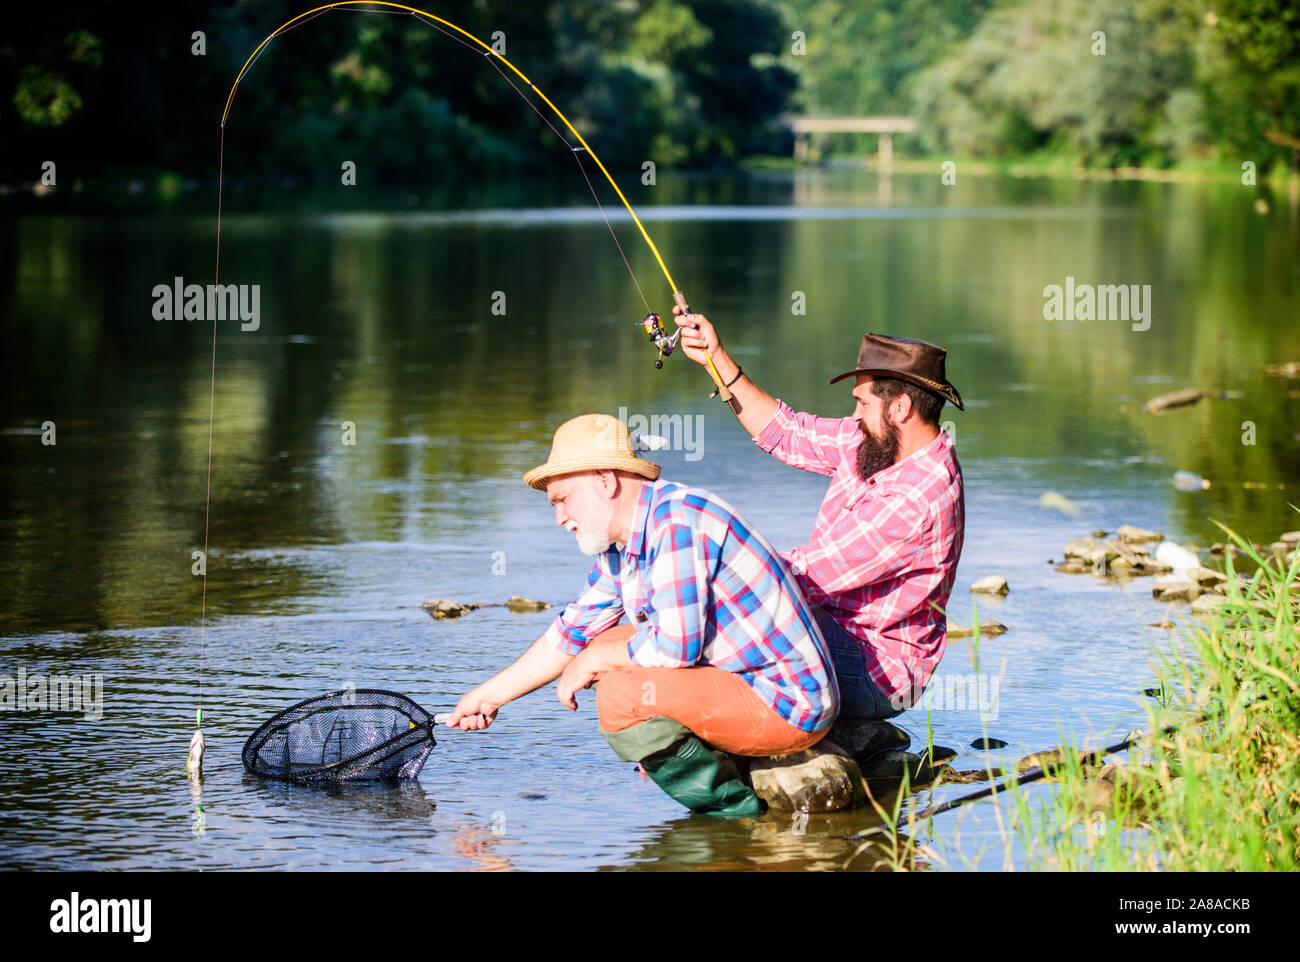 hunting. happy fishermen friendship. Catching and fishing. Two male friends  fishing together. retired dad and mature bearded son. fly fish hobby of men  in checkered shirt. retirement fishery Stock Photo - Alamy